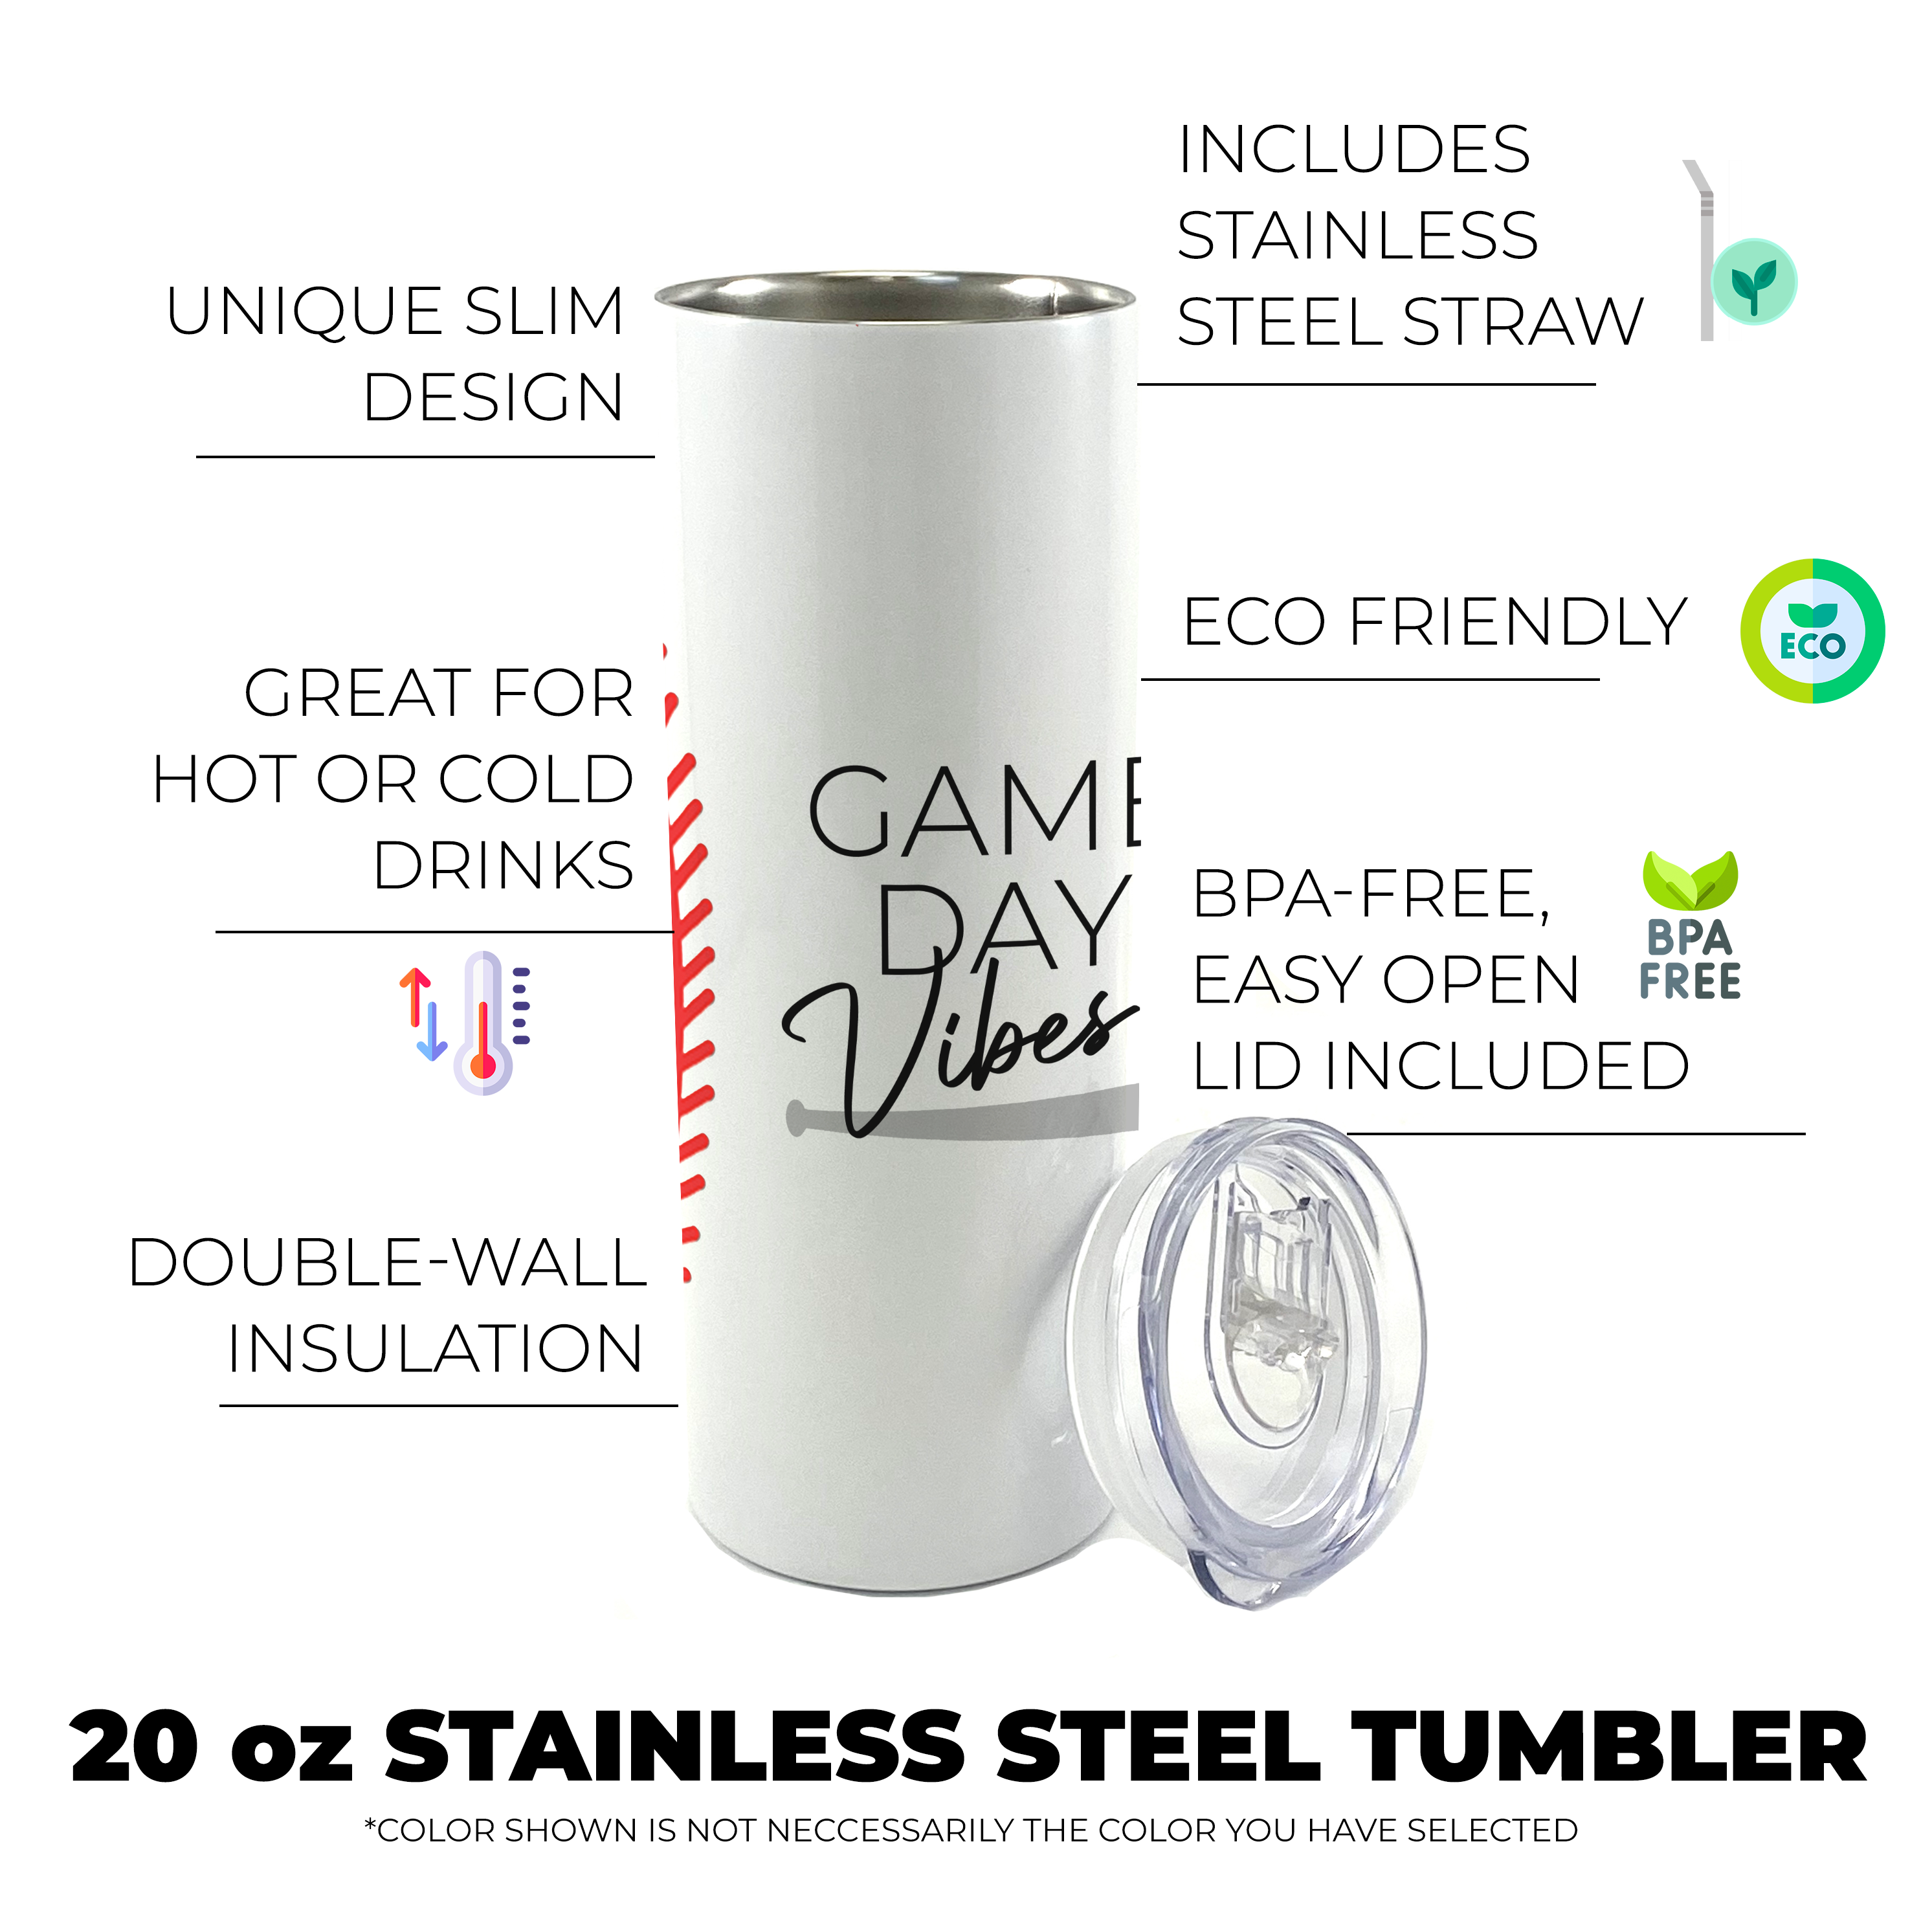 Sports Collection (Game Day Vibes - Baseball) 20 Oz Stainless Steel Travel Tumbler with Straw